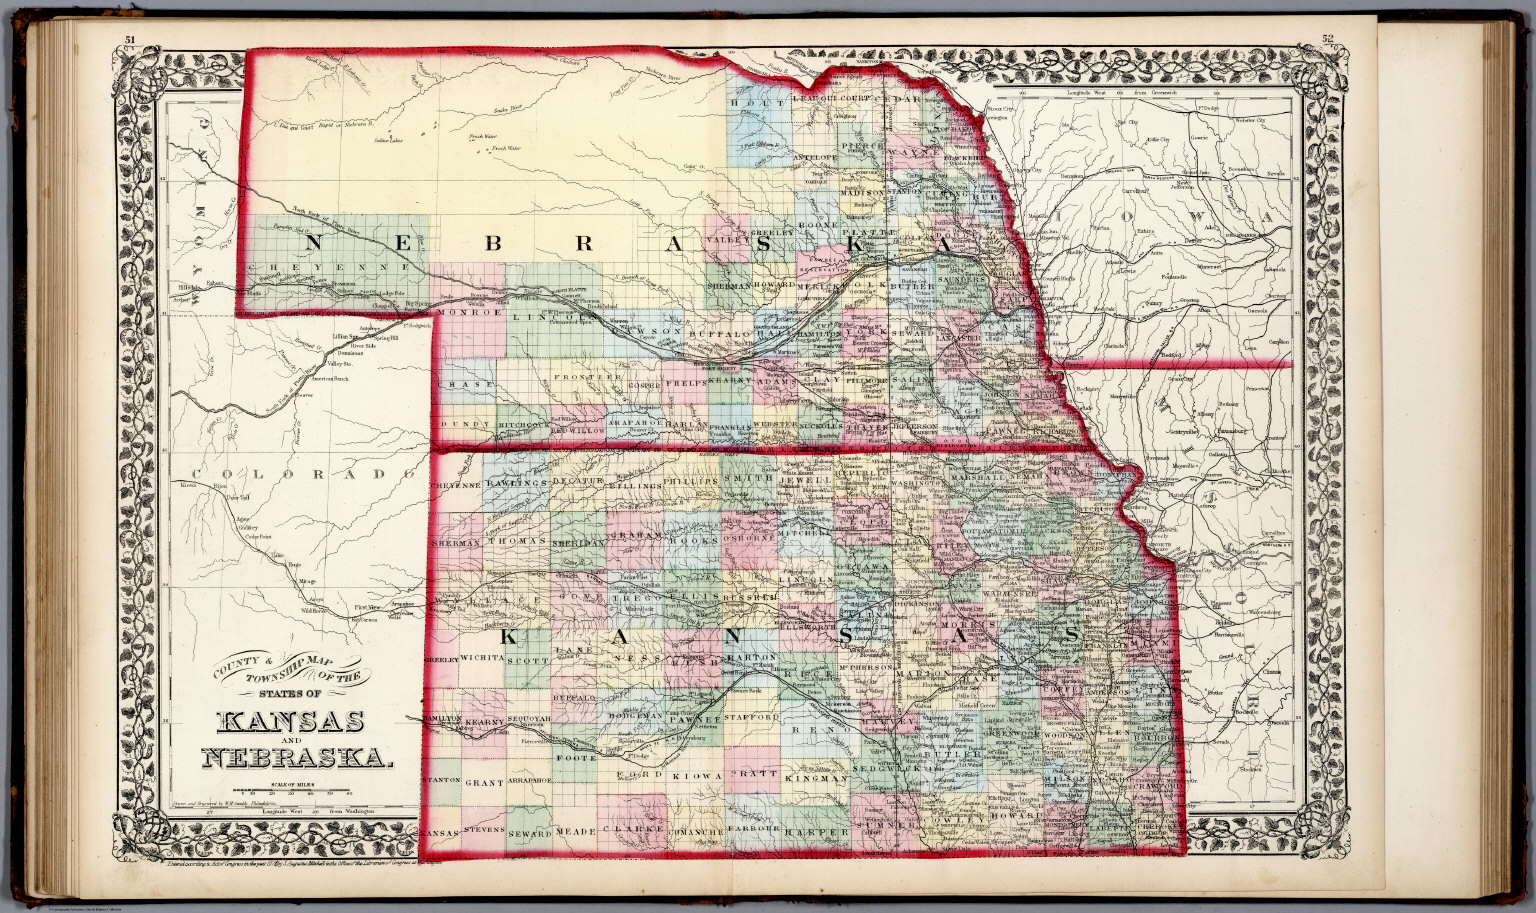 County And Township Map Of The States Of Kansas And Nebraska David Rumsey Historical Map Collection 5617